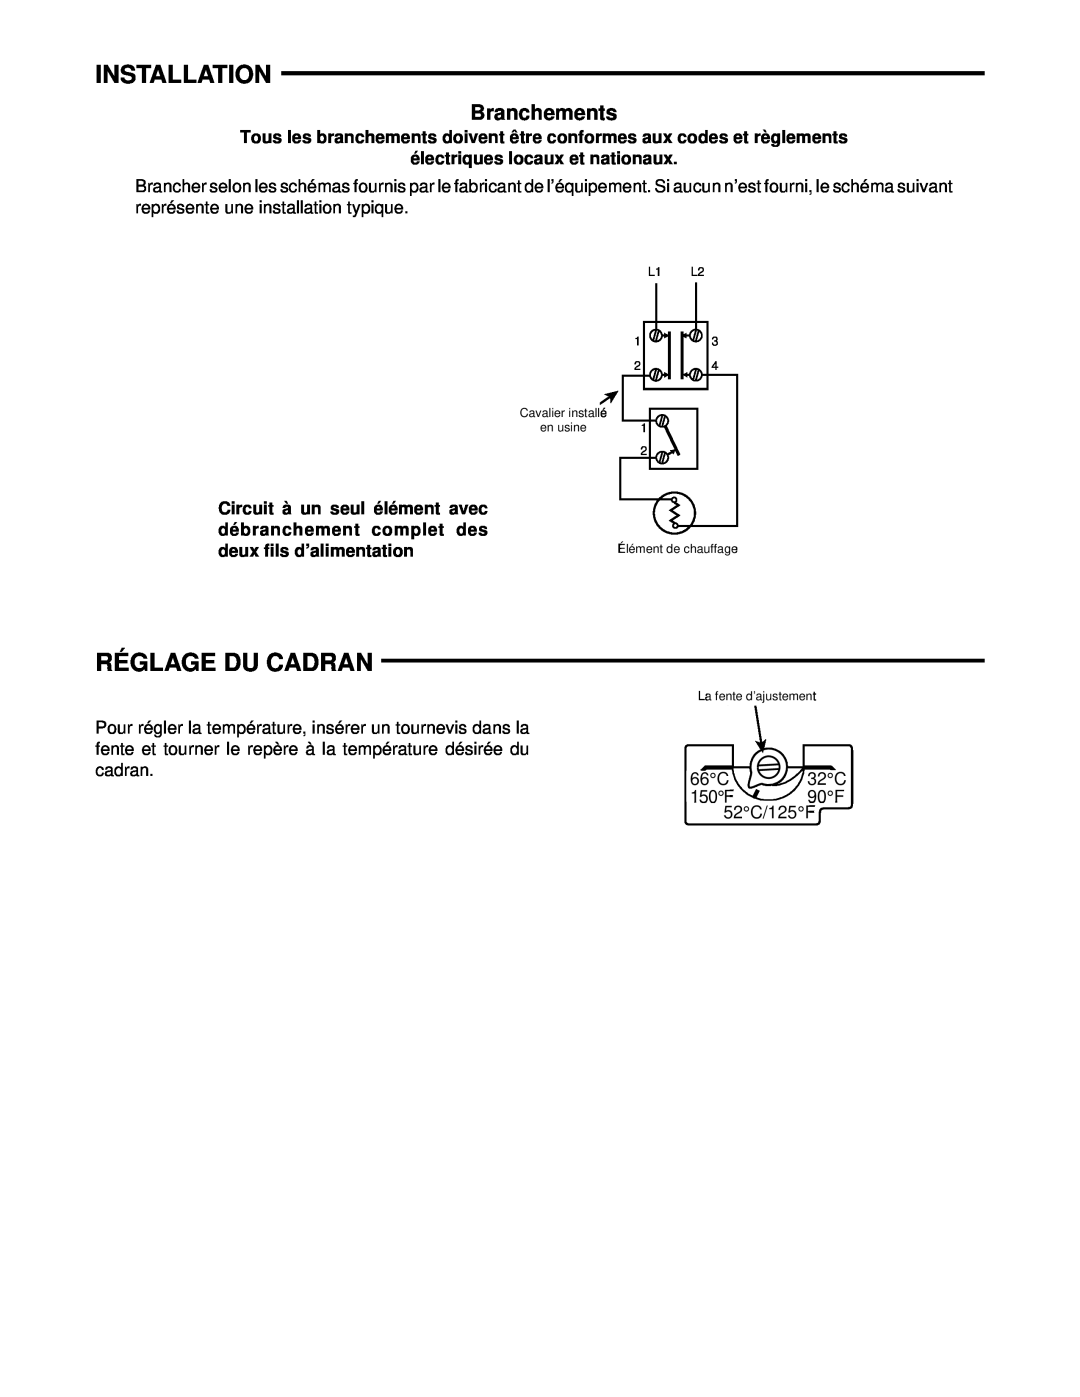 White Rodgers 755-50 specifications Réglage Du Cadran, Branchements, Installation 